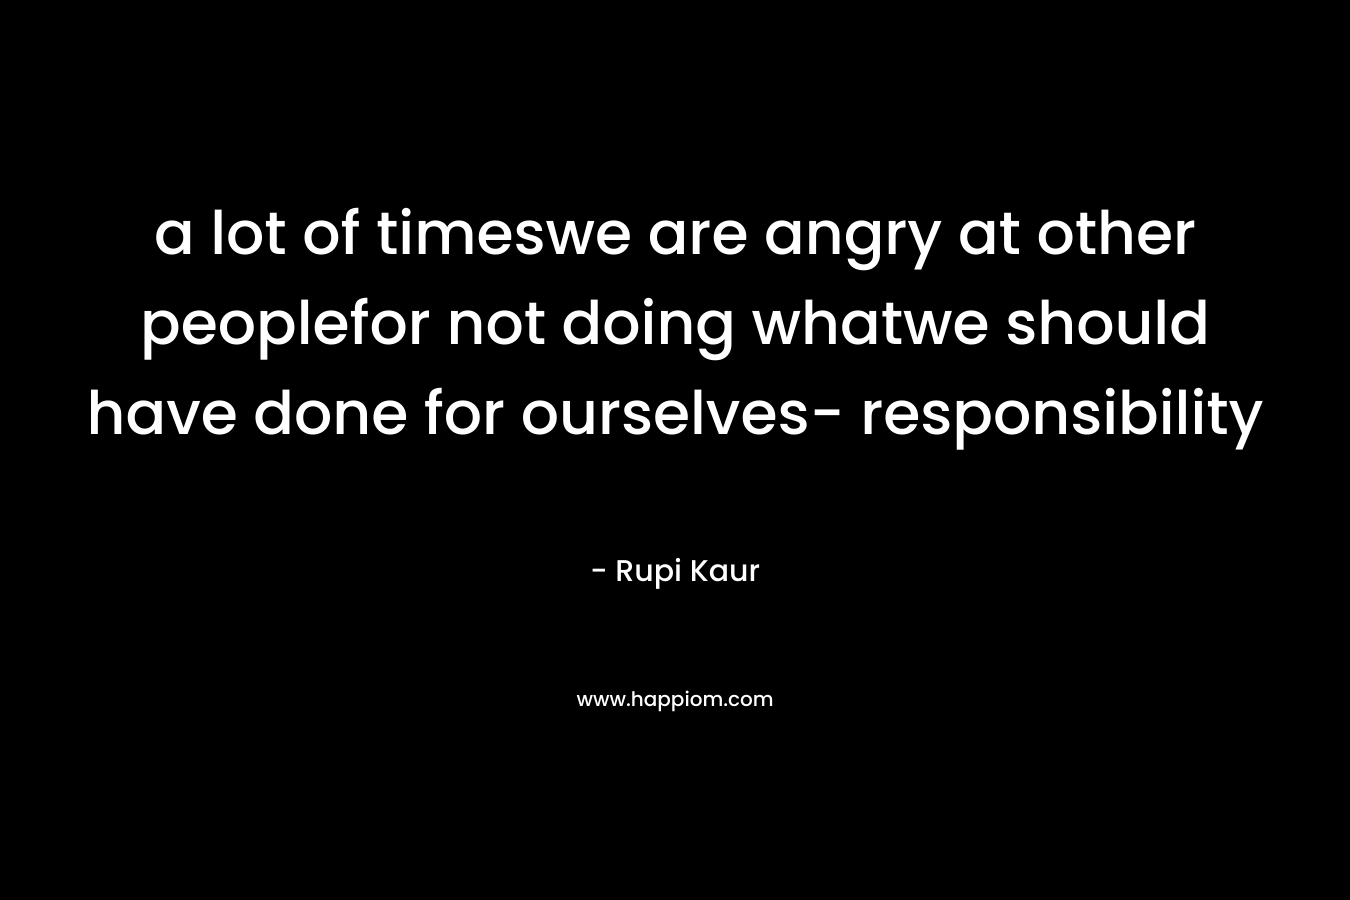 a lot of timeswe are angry at other peoplefor not doing whatwe should have done for ourselves- responsibility – Rupi Kaur